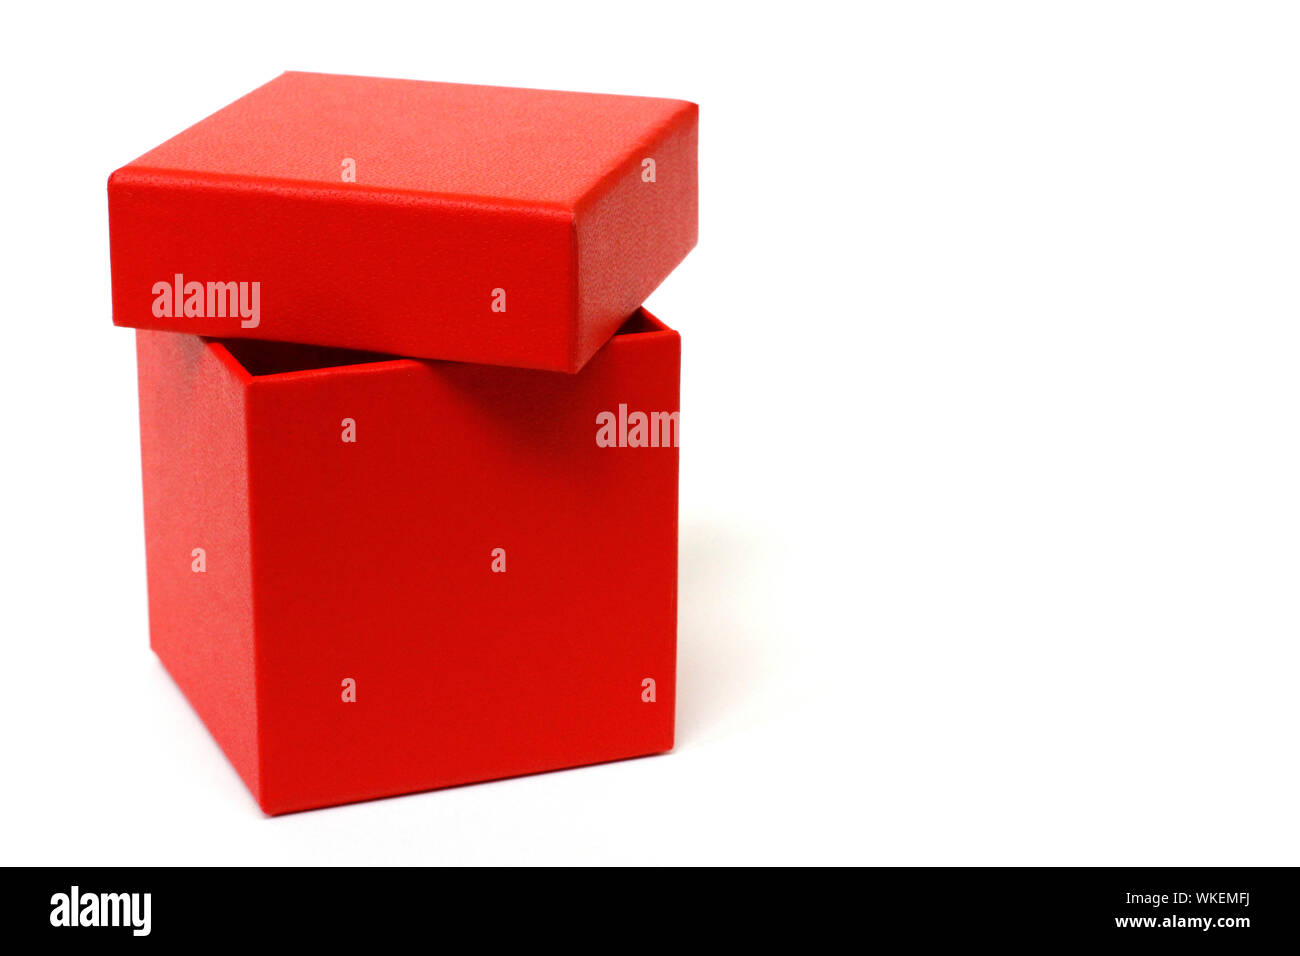 Red gift box with a lid on a white background. There is a place for text. Bright red box without inscriptions. Stock Photo